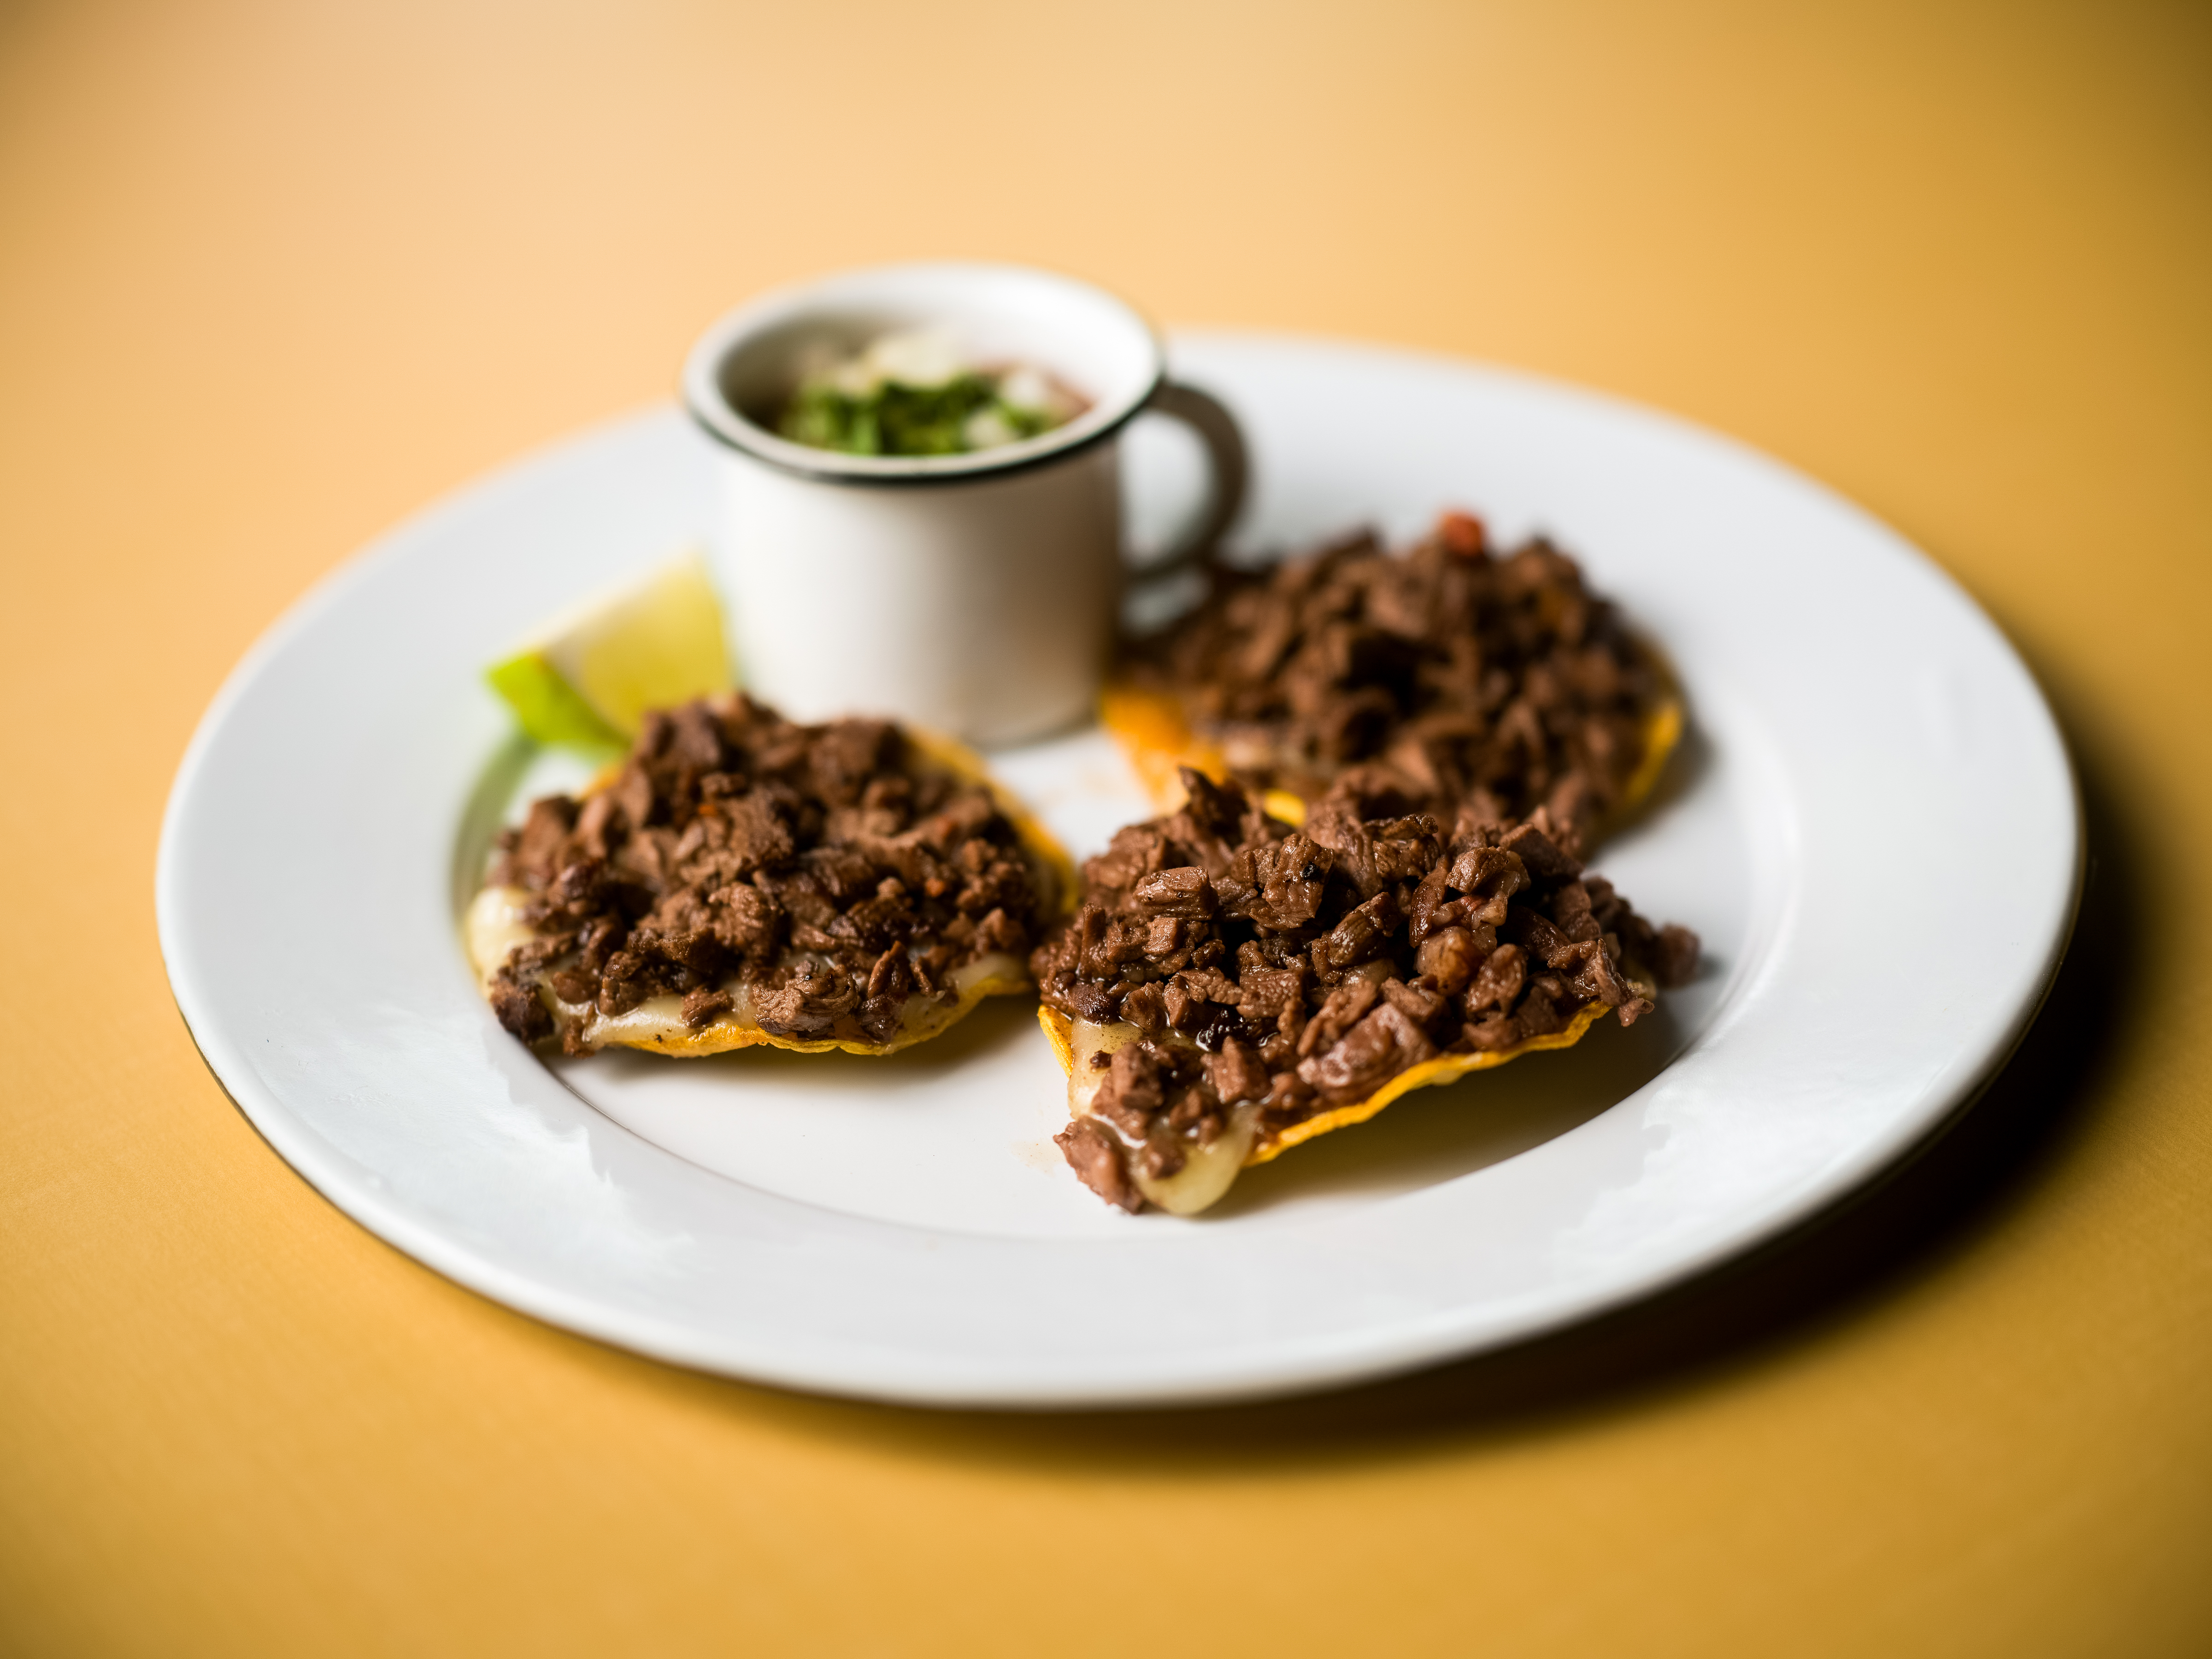 Volcán de bistec, or crispy tortillas topped with shredded beef, with a side of salsa.